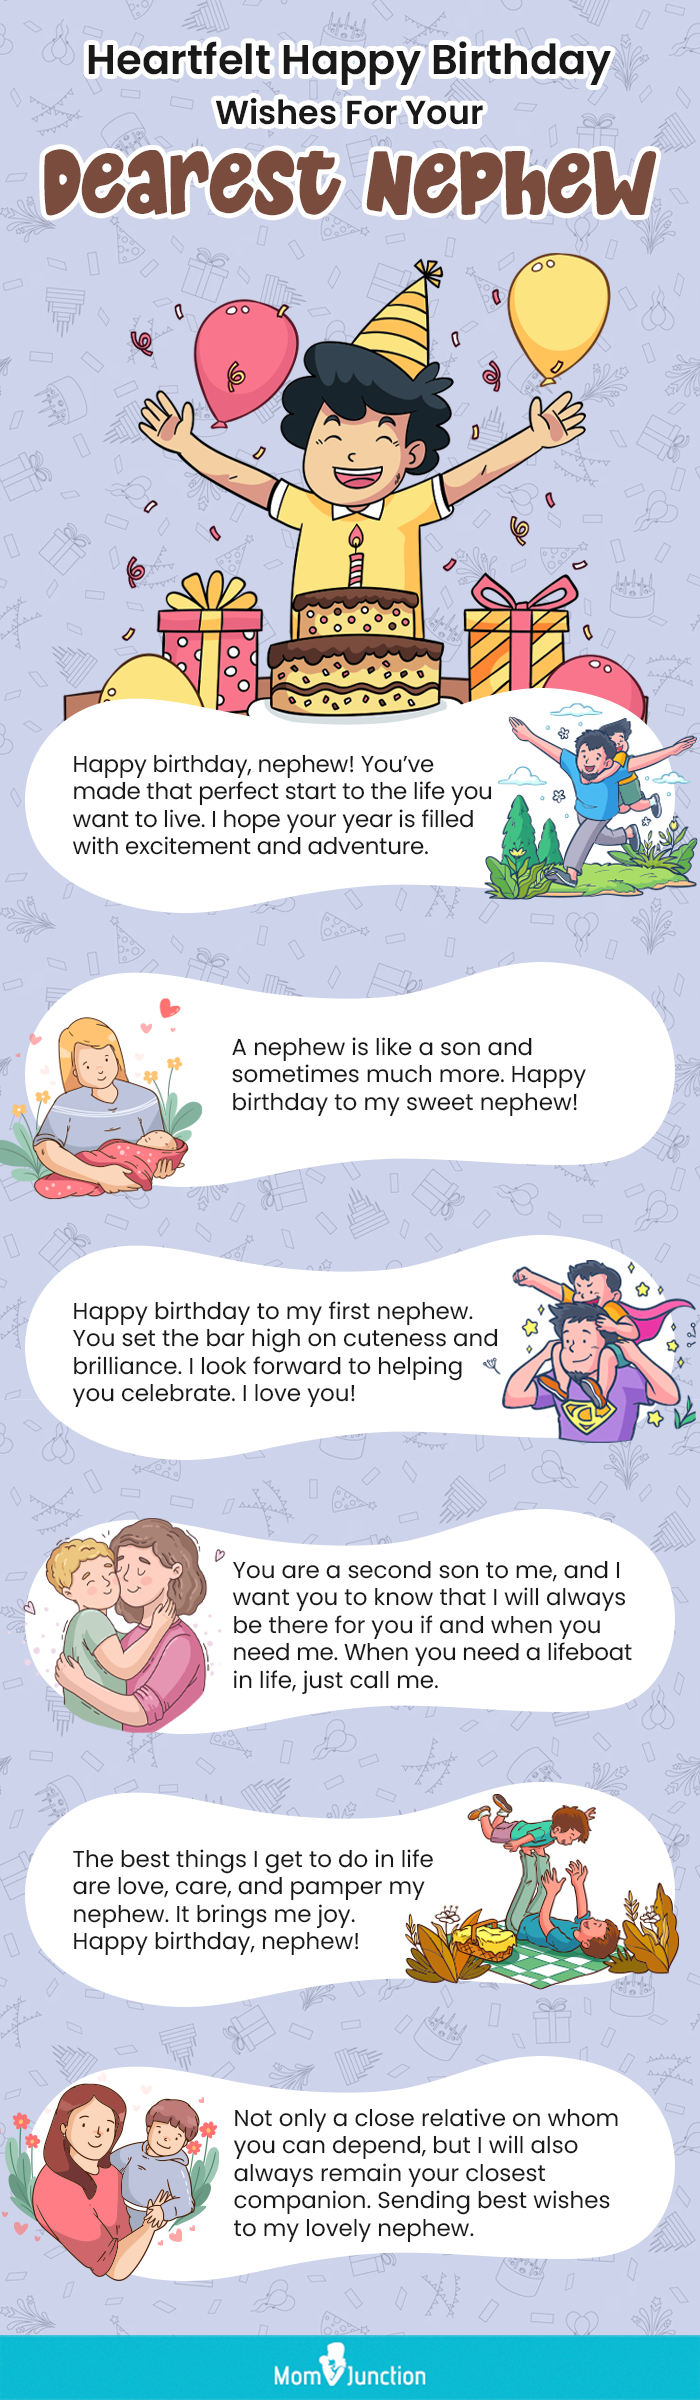 happy birthday poems for her in spanish